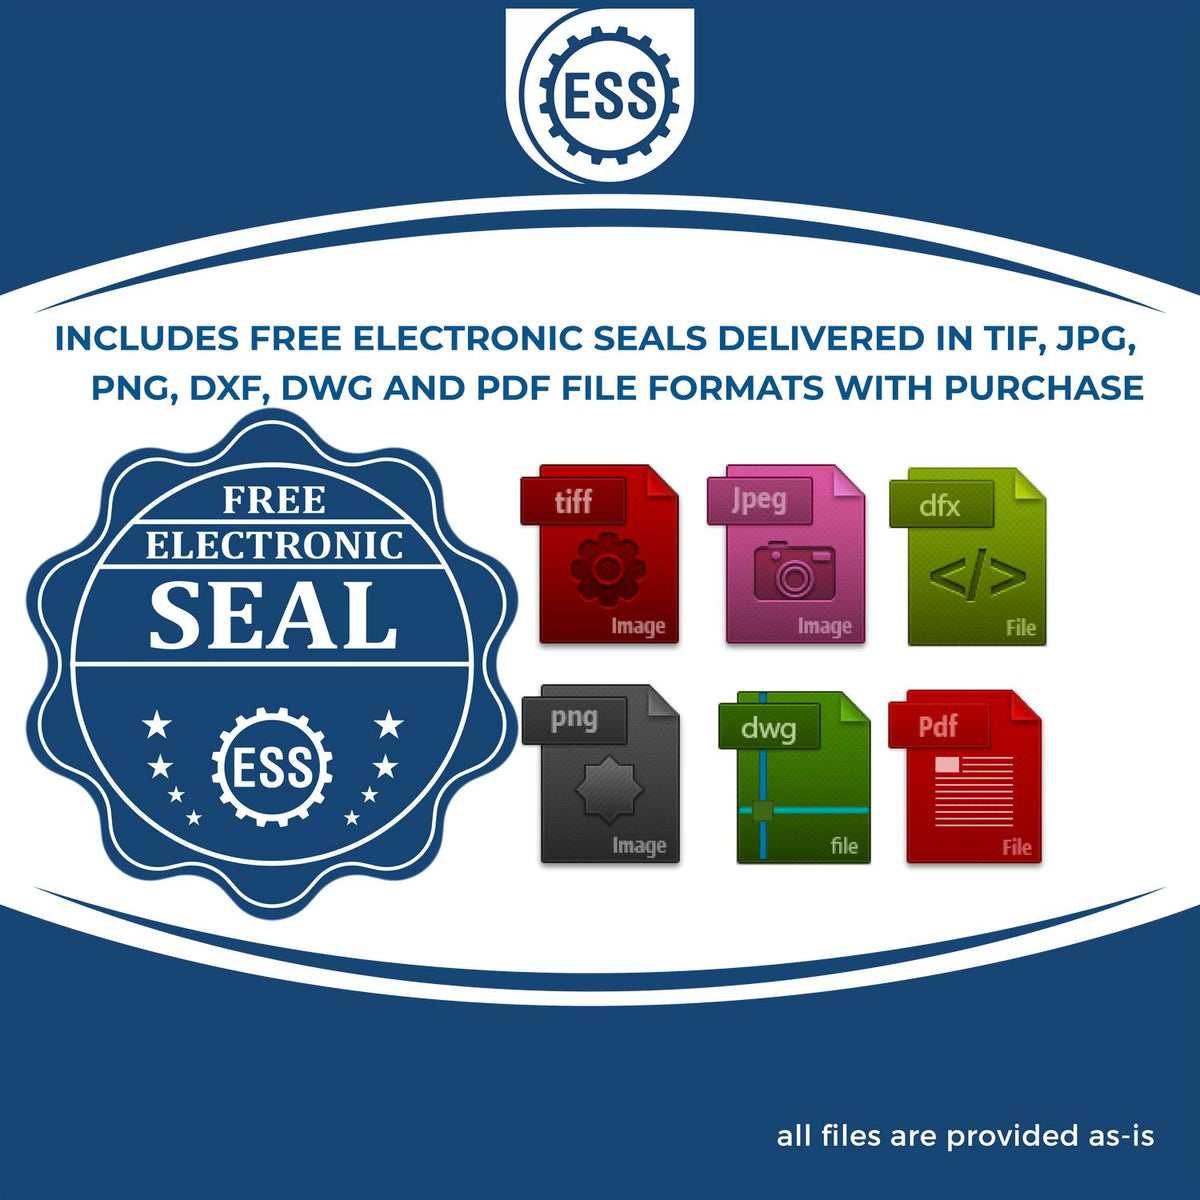 An infographic for the free electronic seal for the Long Reach Florida PE Seal illustrating the different file type icons such as DXF, DWG, TIF, JPG and PNG.